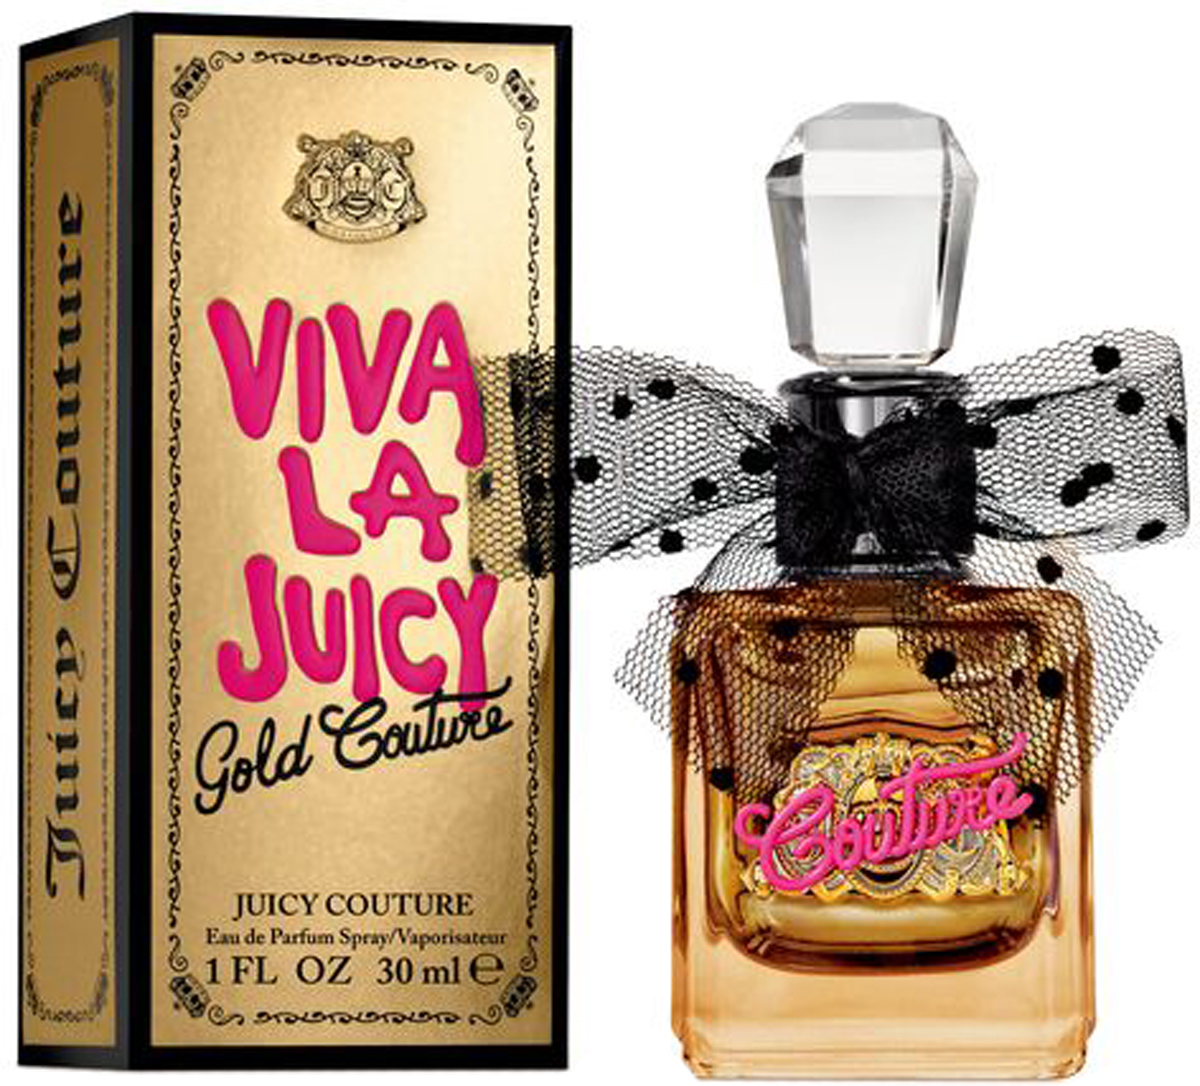 Juicy Couture Viva Gold Couture Парфюмерная вода женская, 30 мл